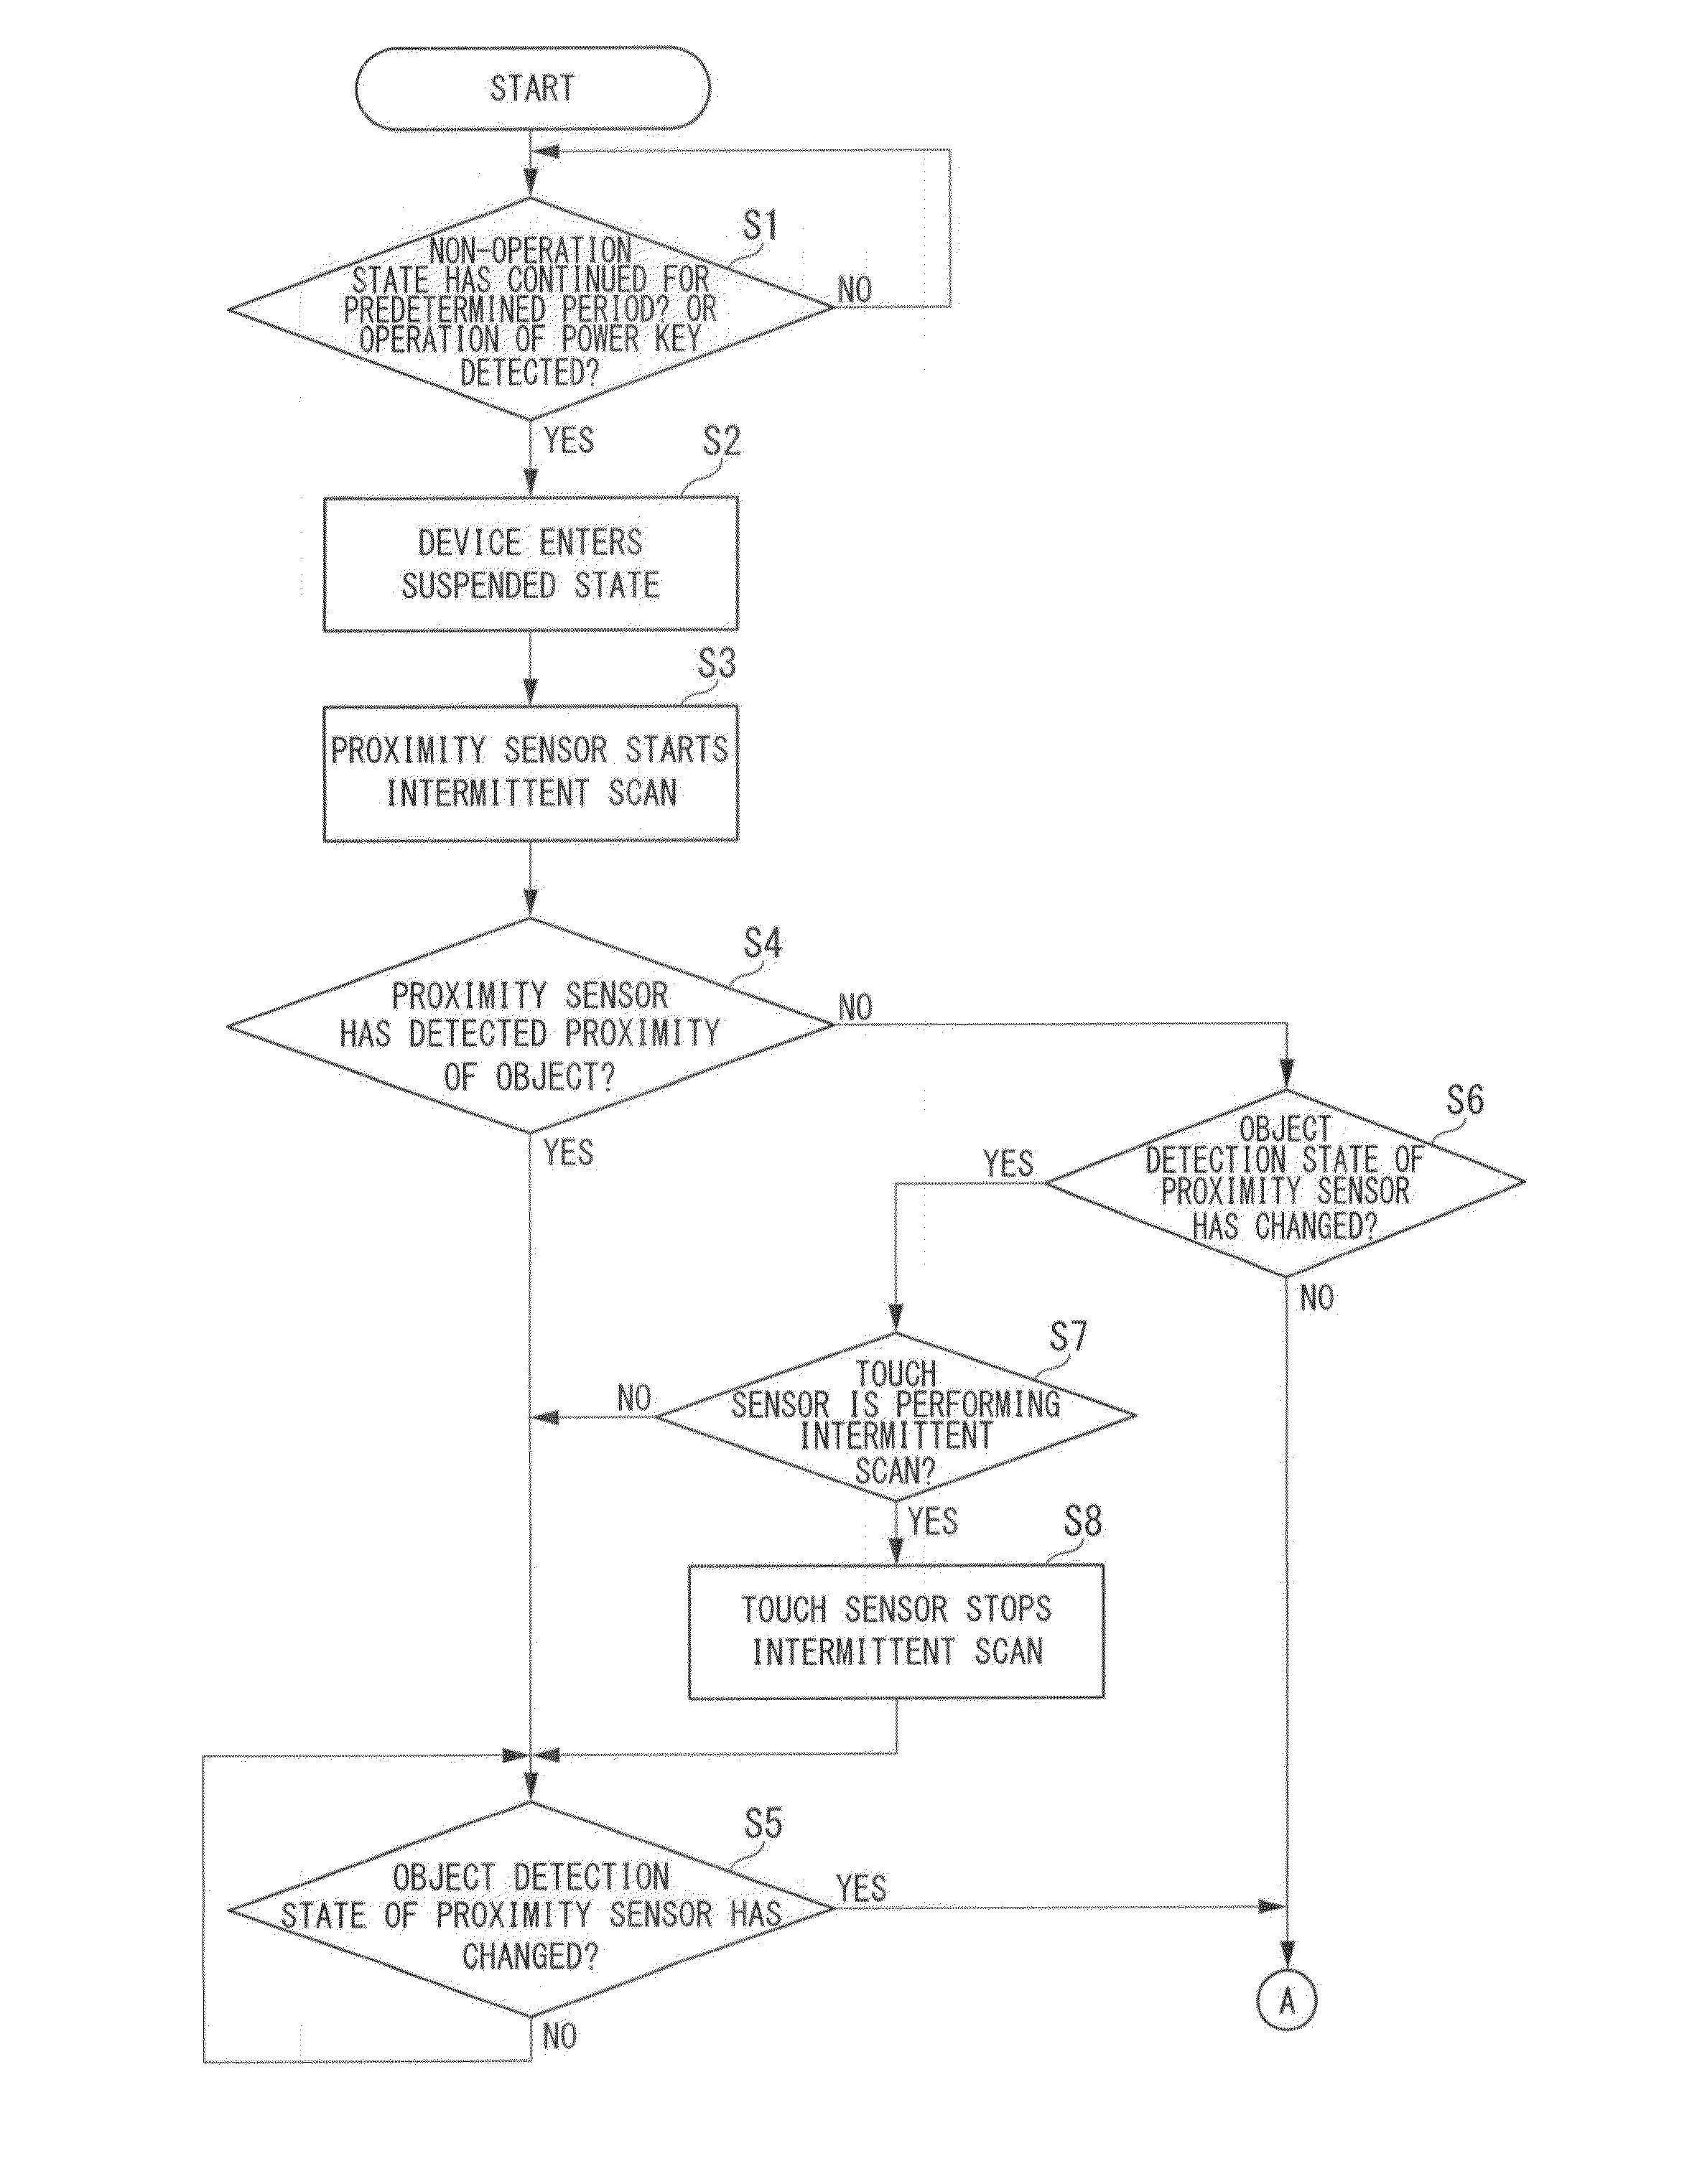 Apparatus and method for controlling a suspended state